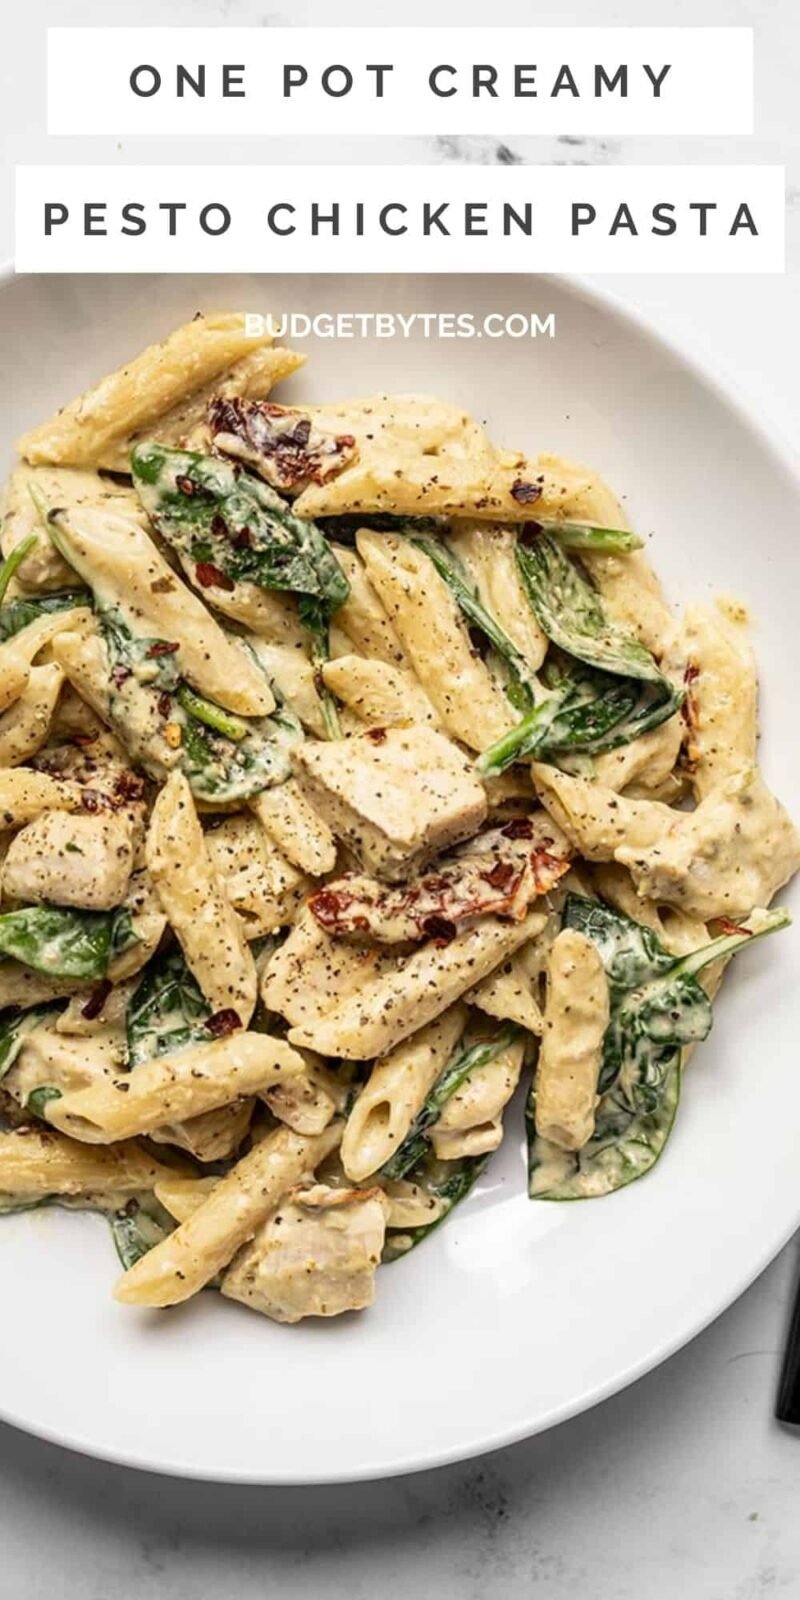 Close up of a bowl of creamy pesto chicken pasta, title text at the top